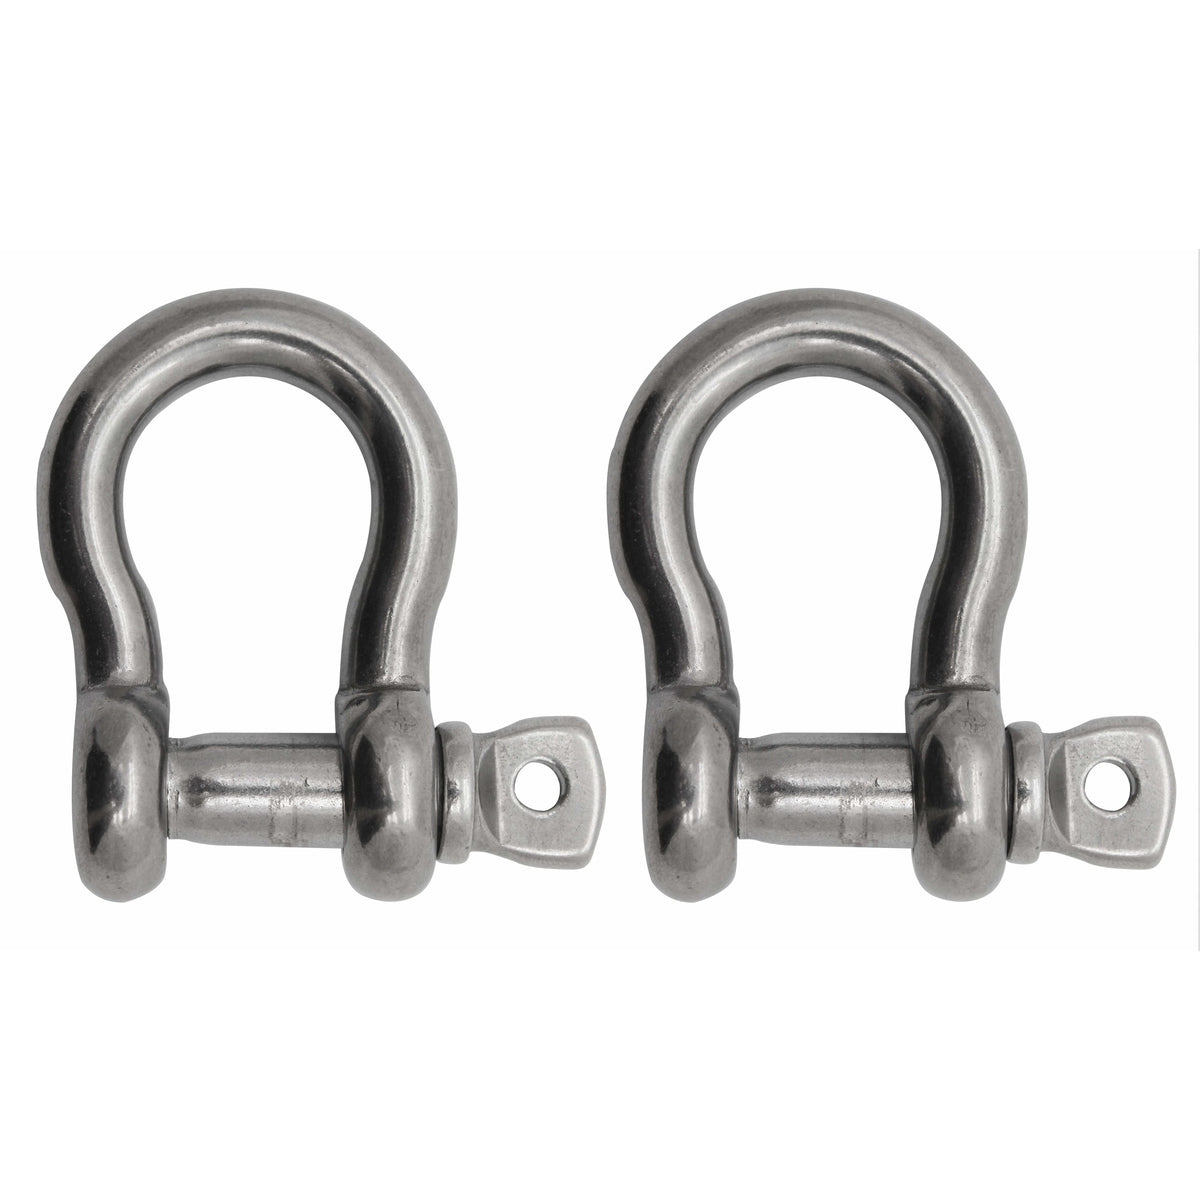 Extreme Max BoatTector SS Anchor Shackle 1/4" 2-pk #3006.8312.2